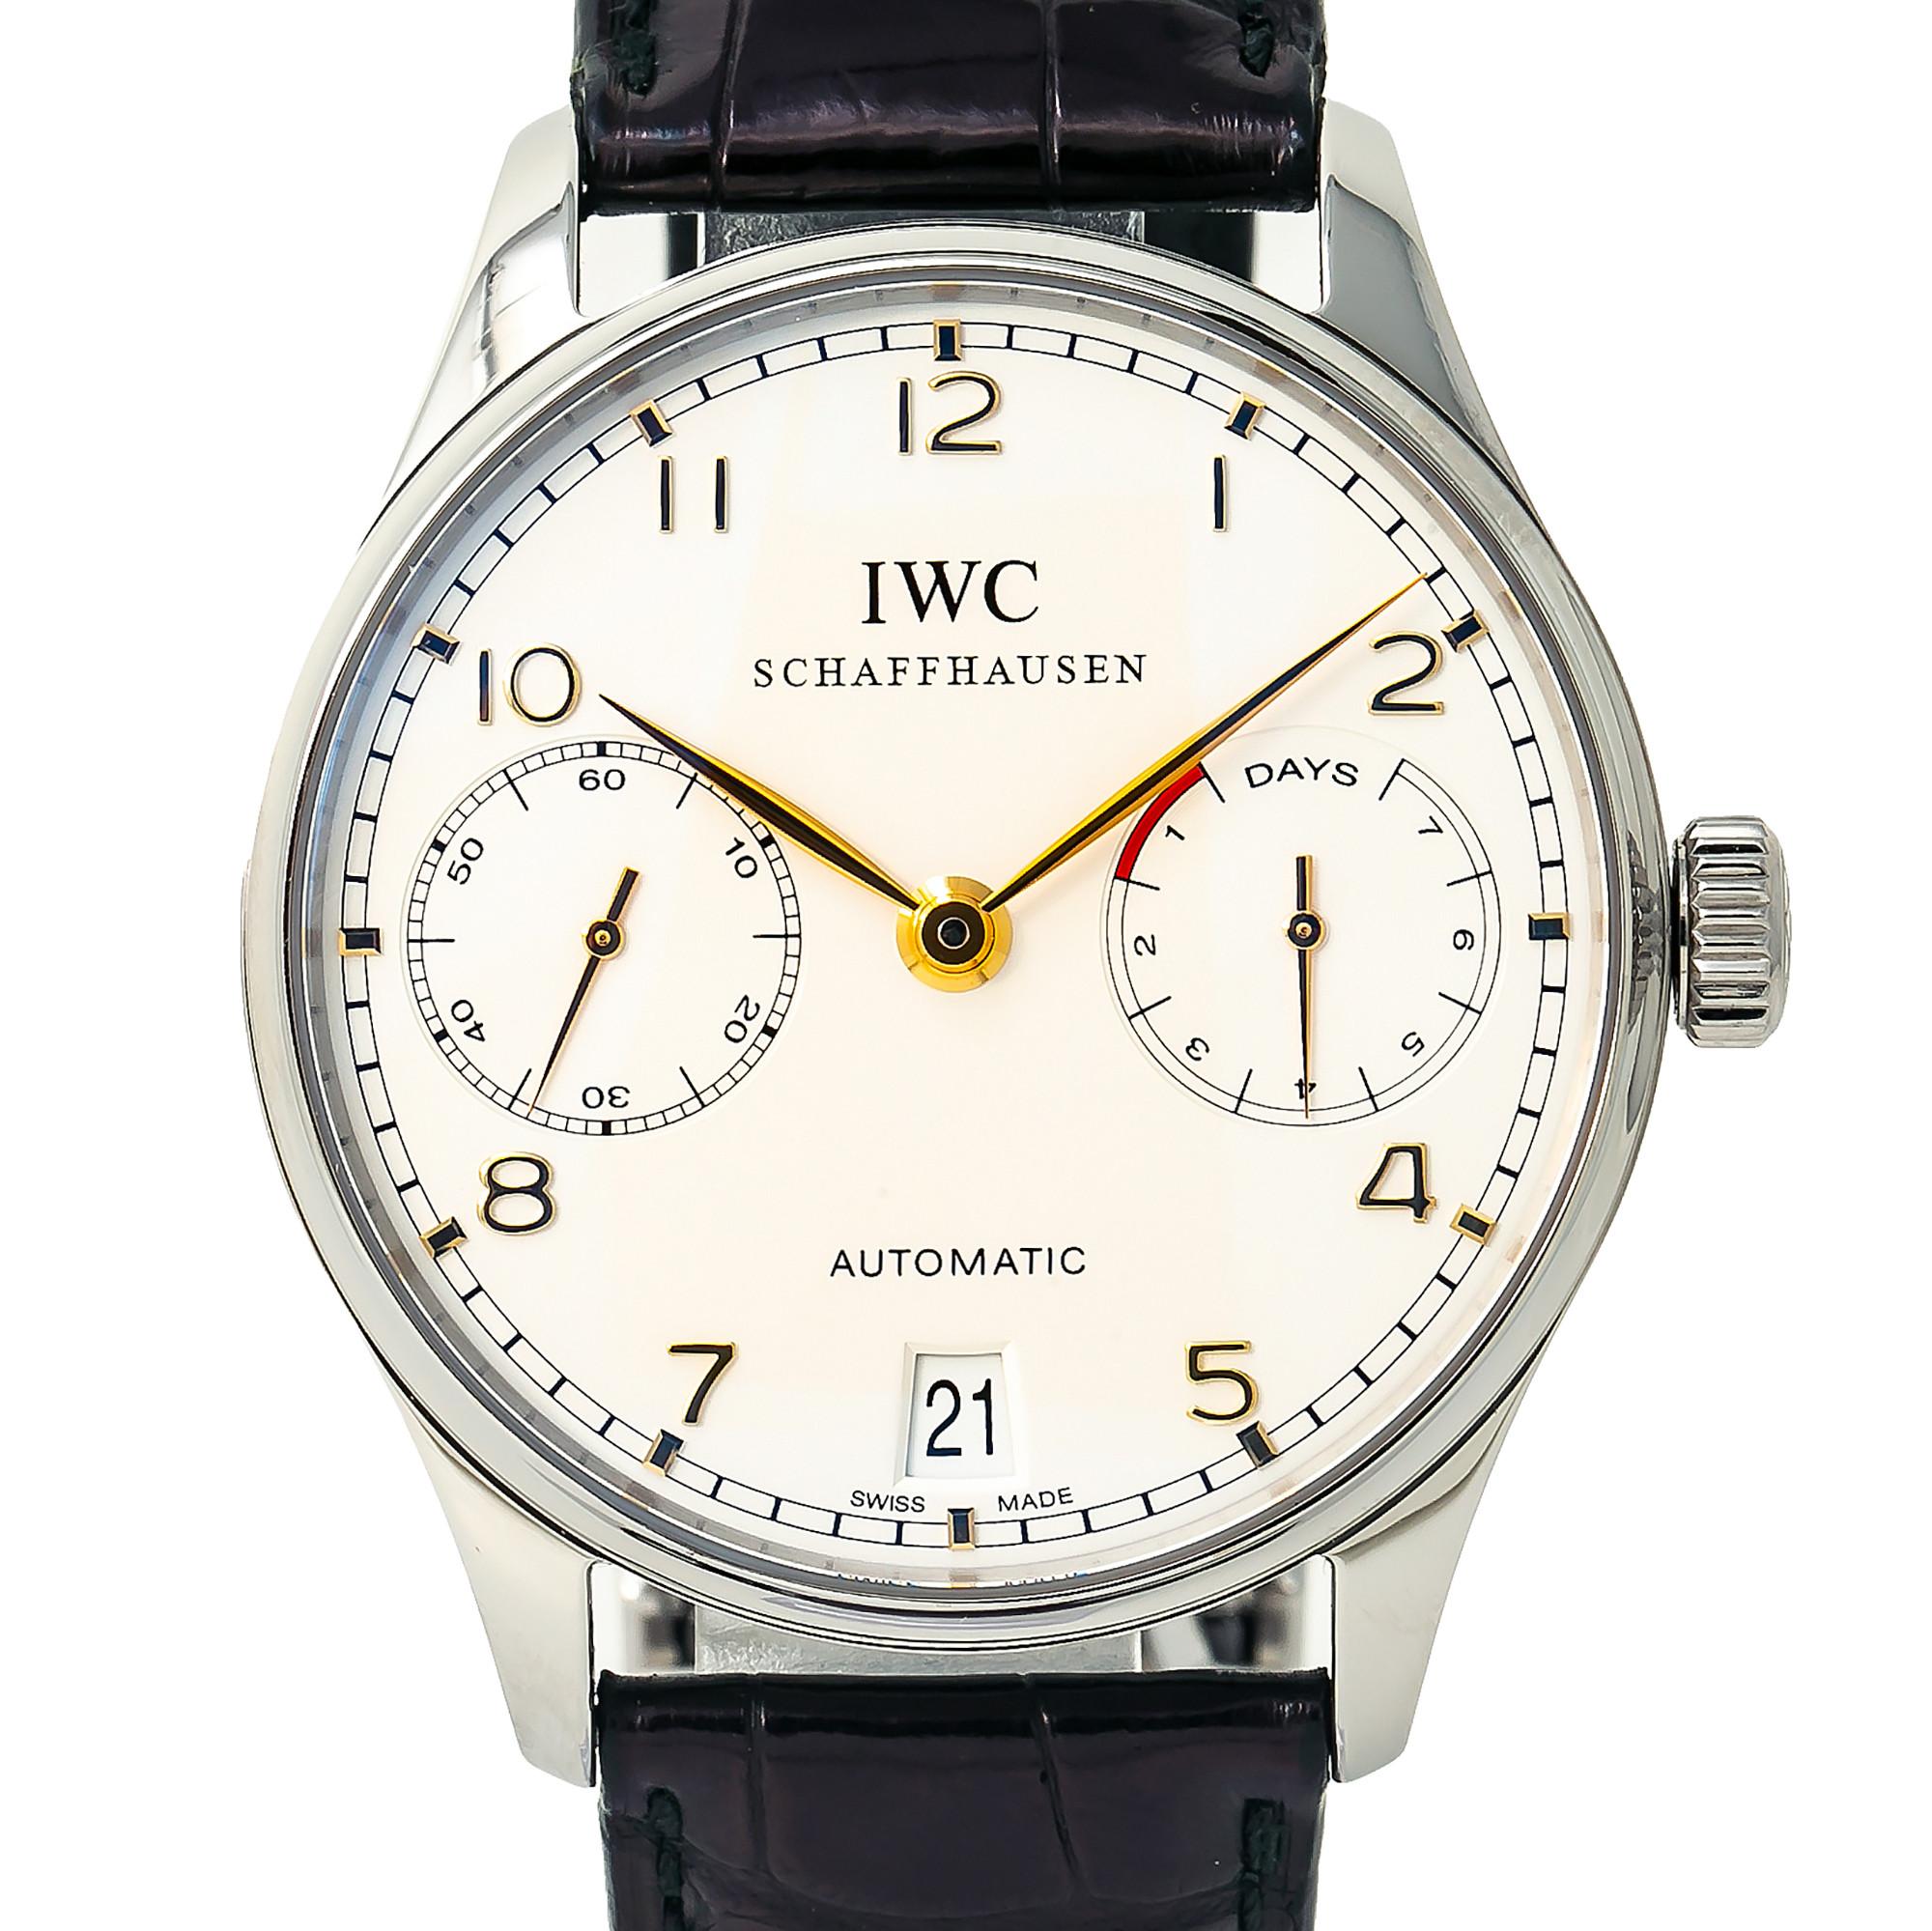 IWC 7 Day Schaffhausen IW500114 Box and Papers 2013 Men's Automatic Watch For Sale 1